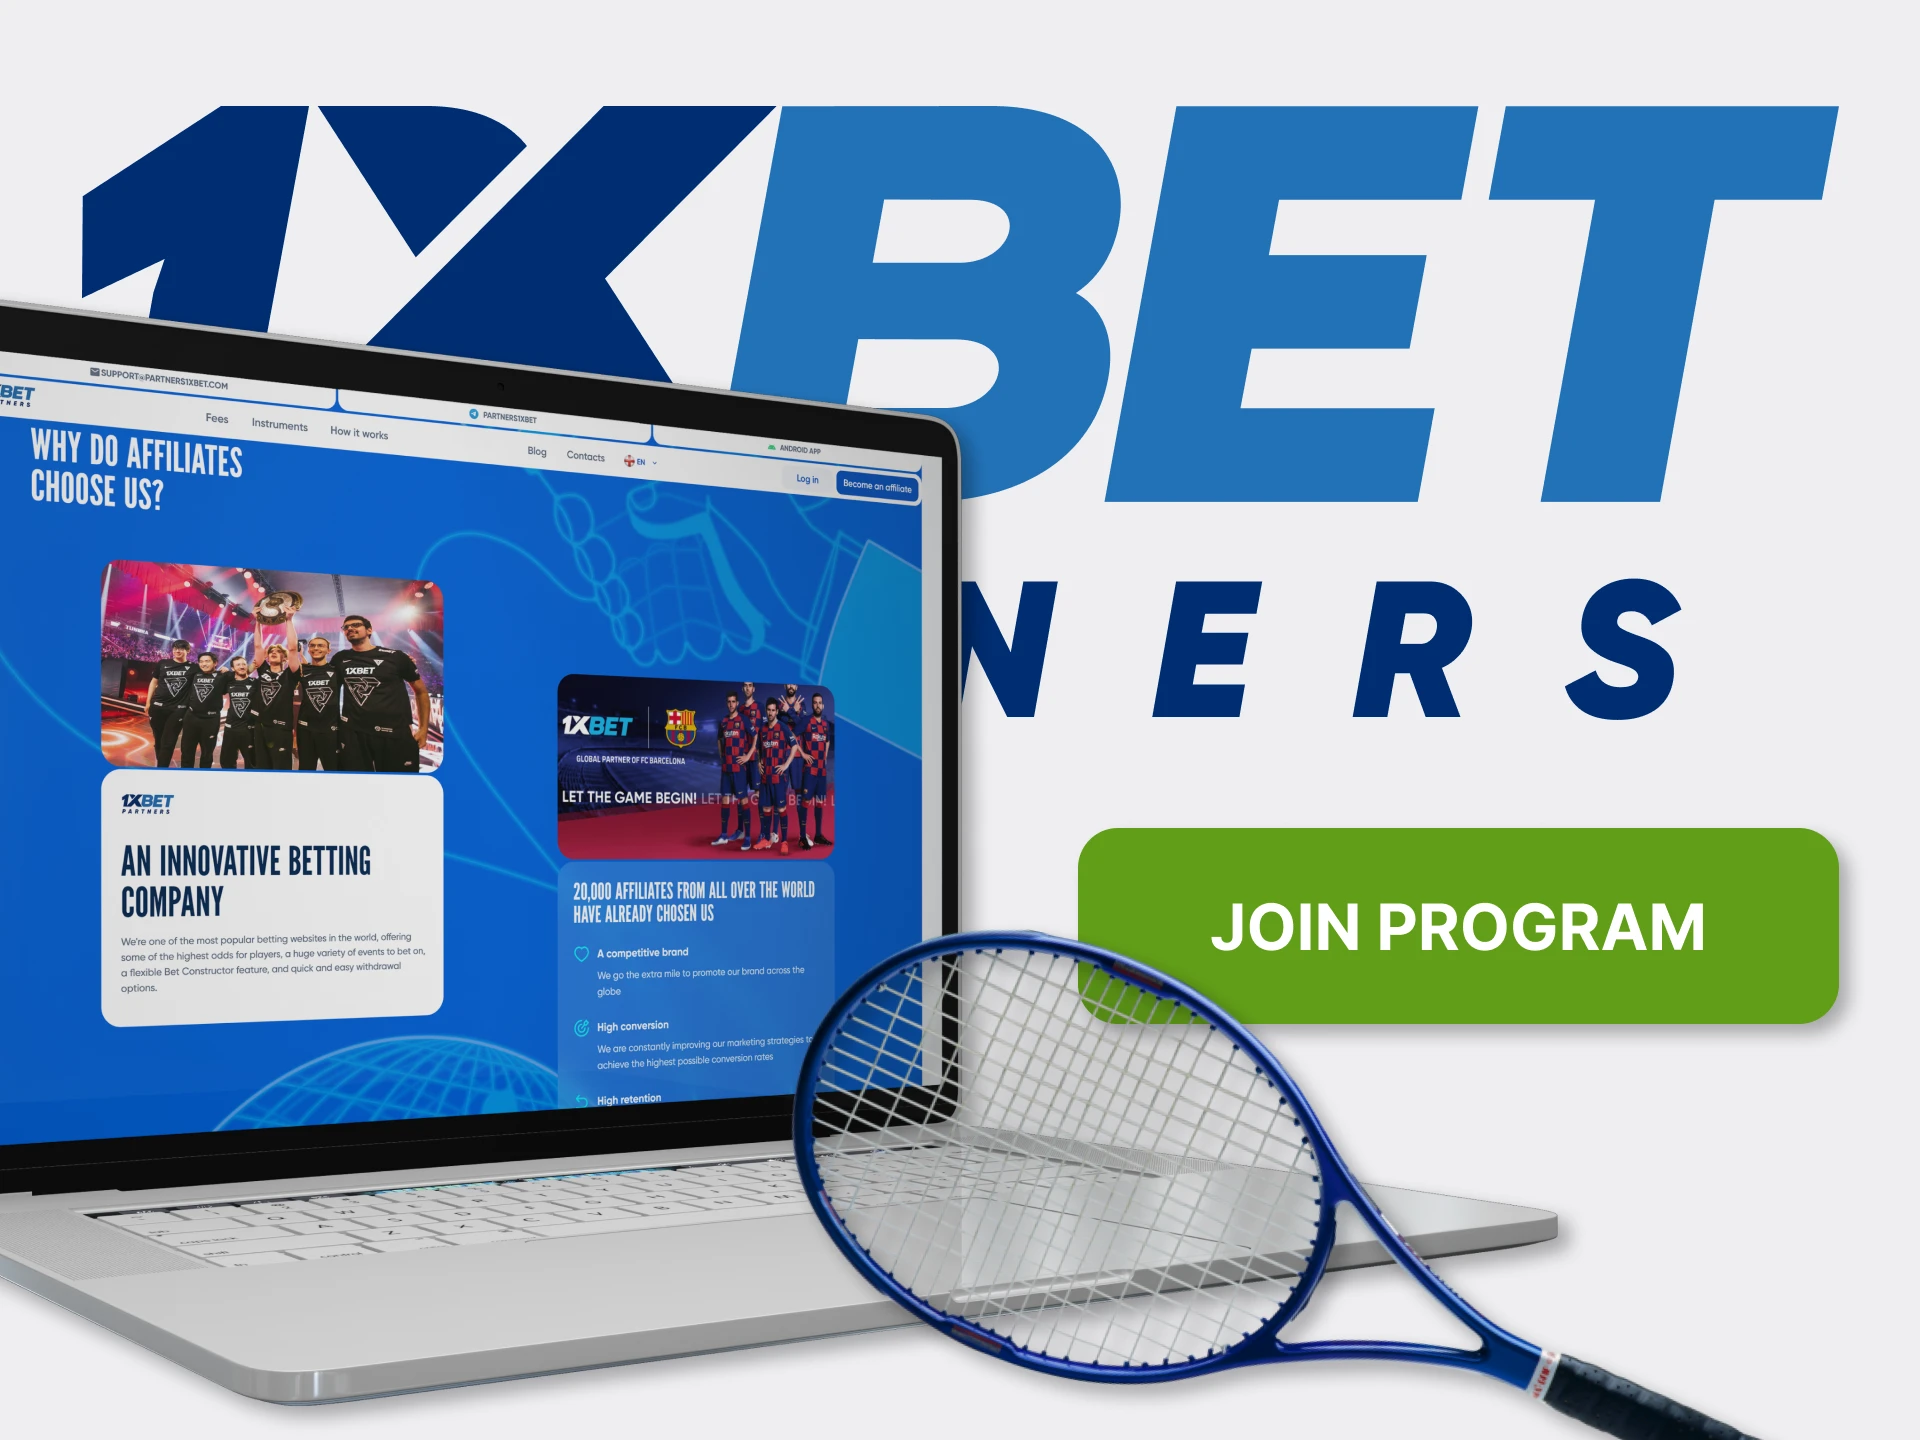 Find out who can become an affiliate program partner of 1xBet.